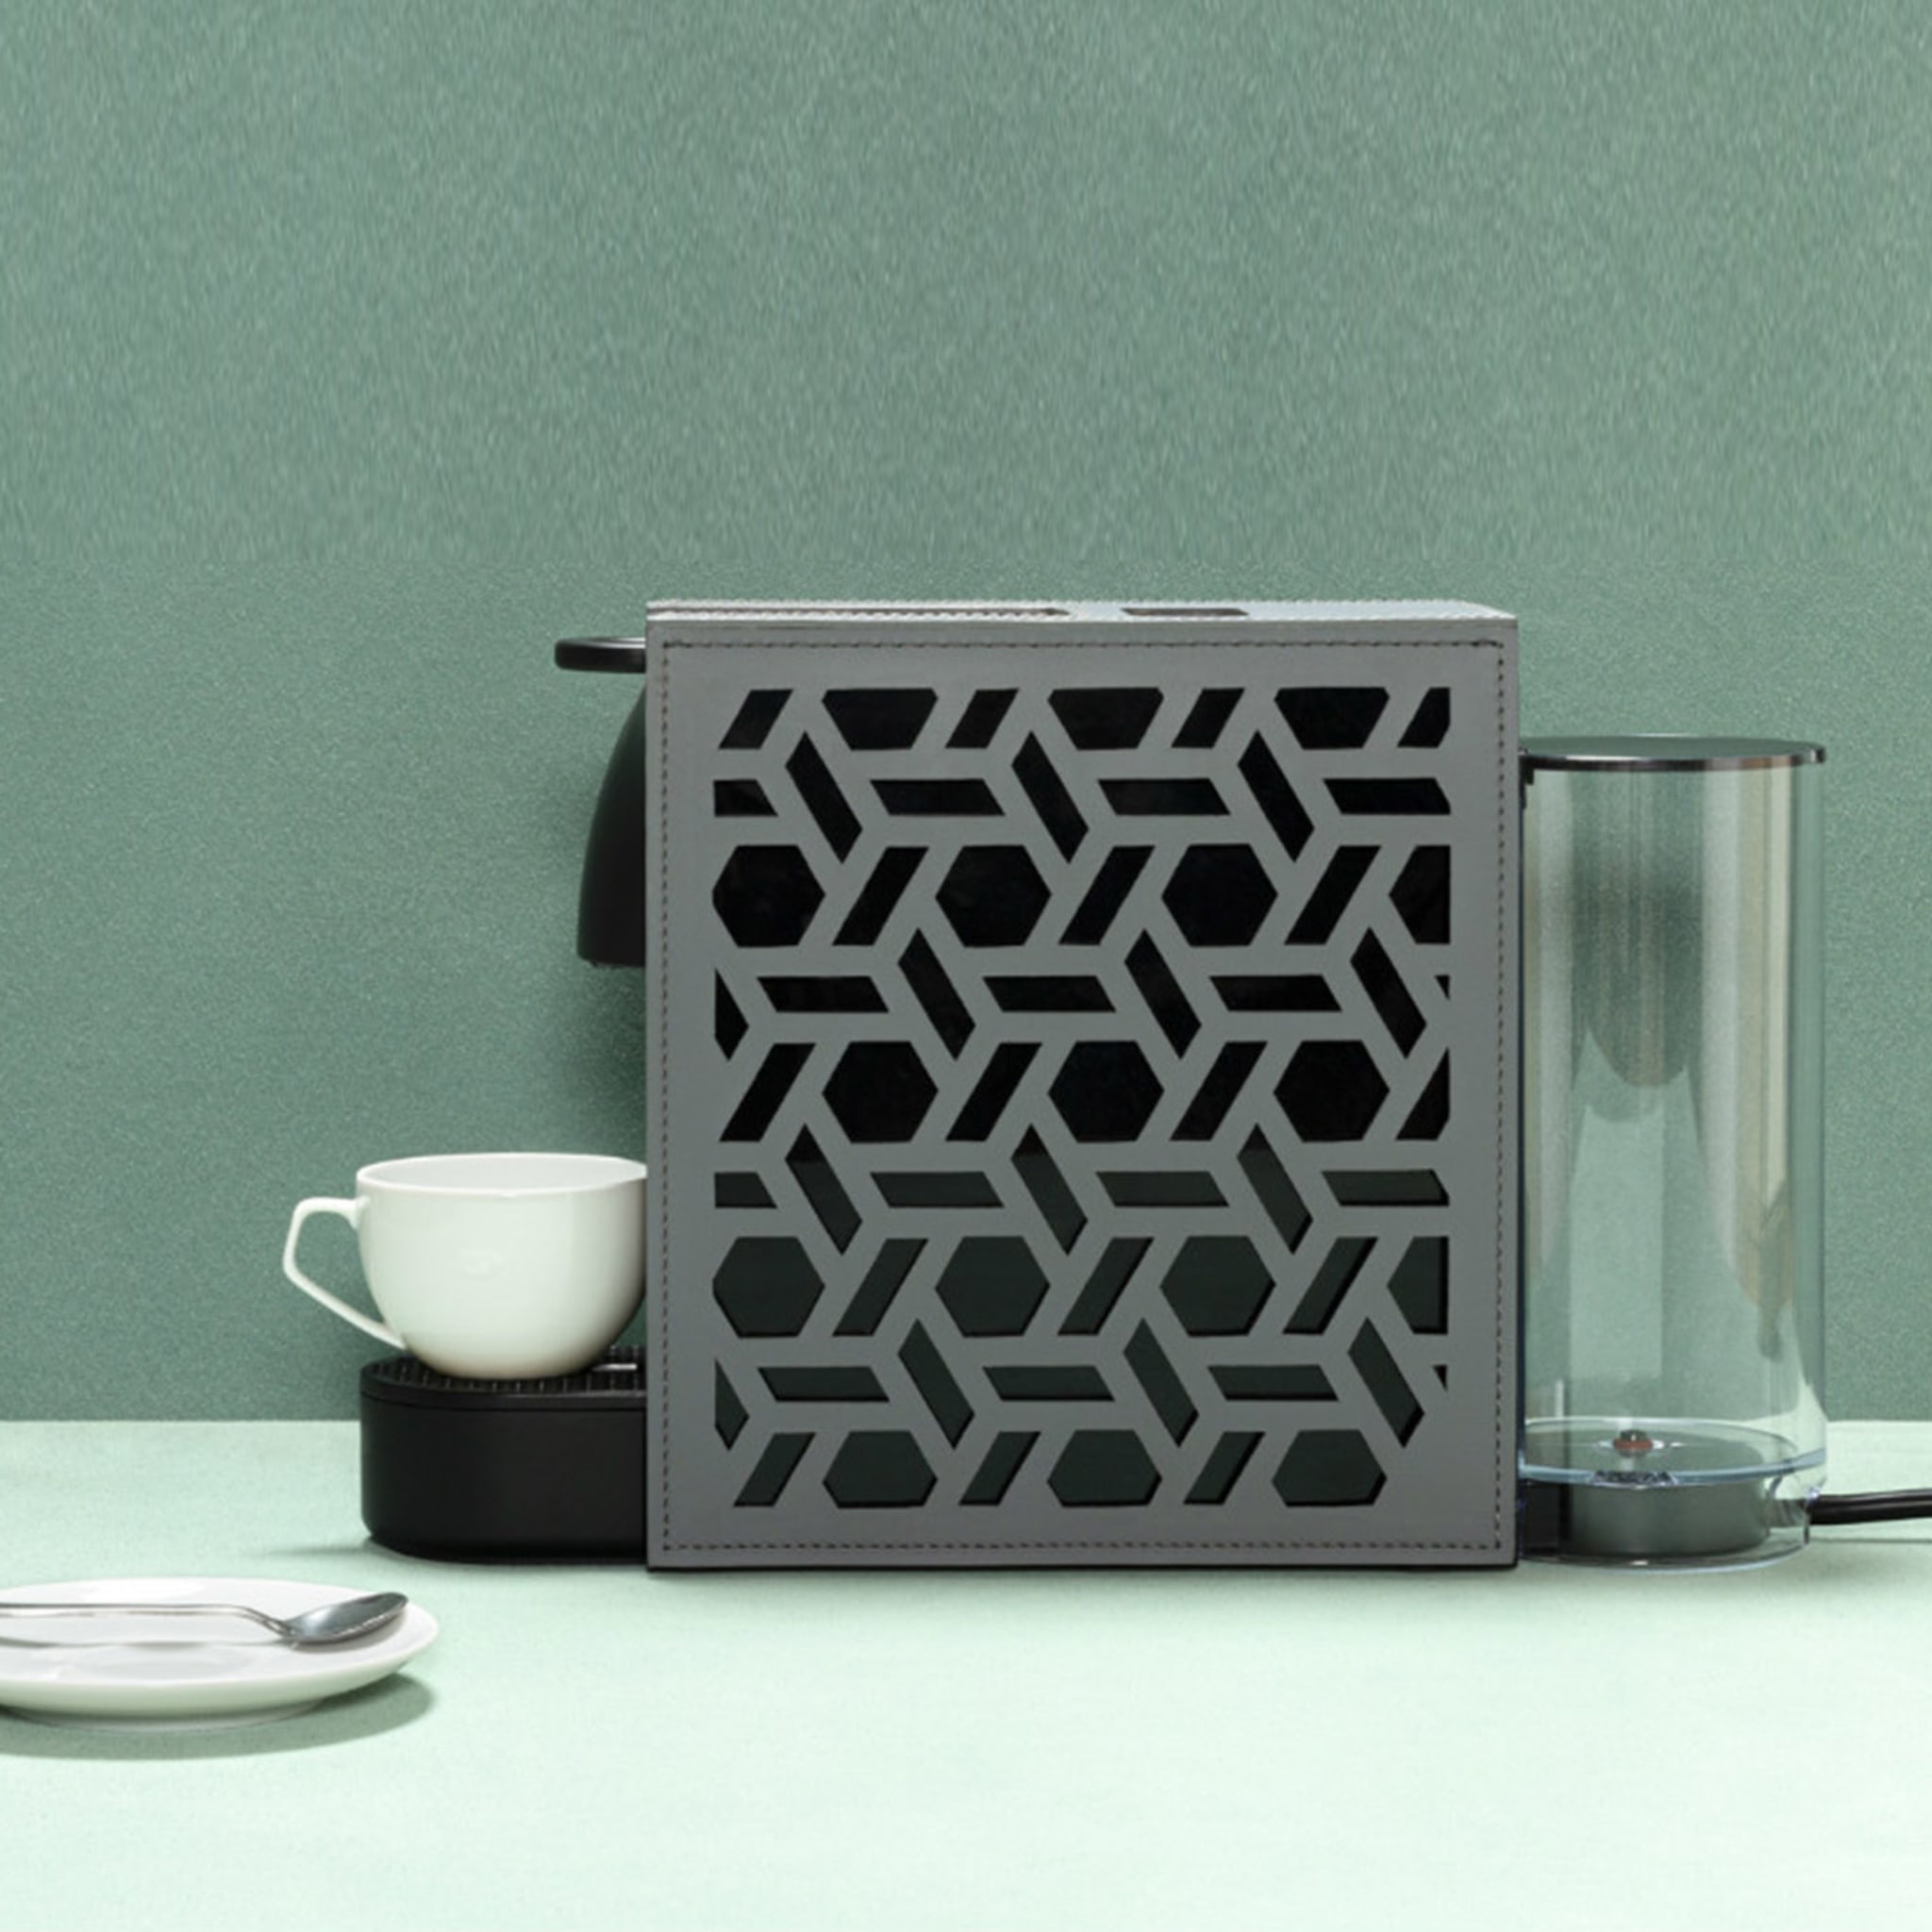 Essenza Coffee Machine with Removable Cover with Patterns - Alternative view 5